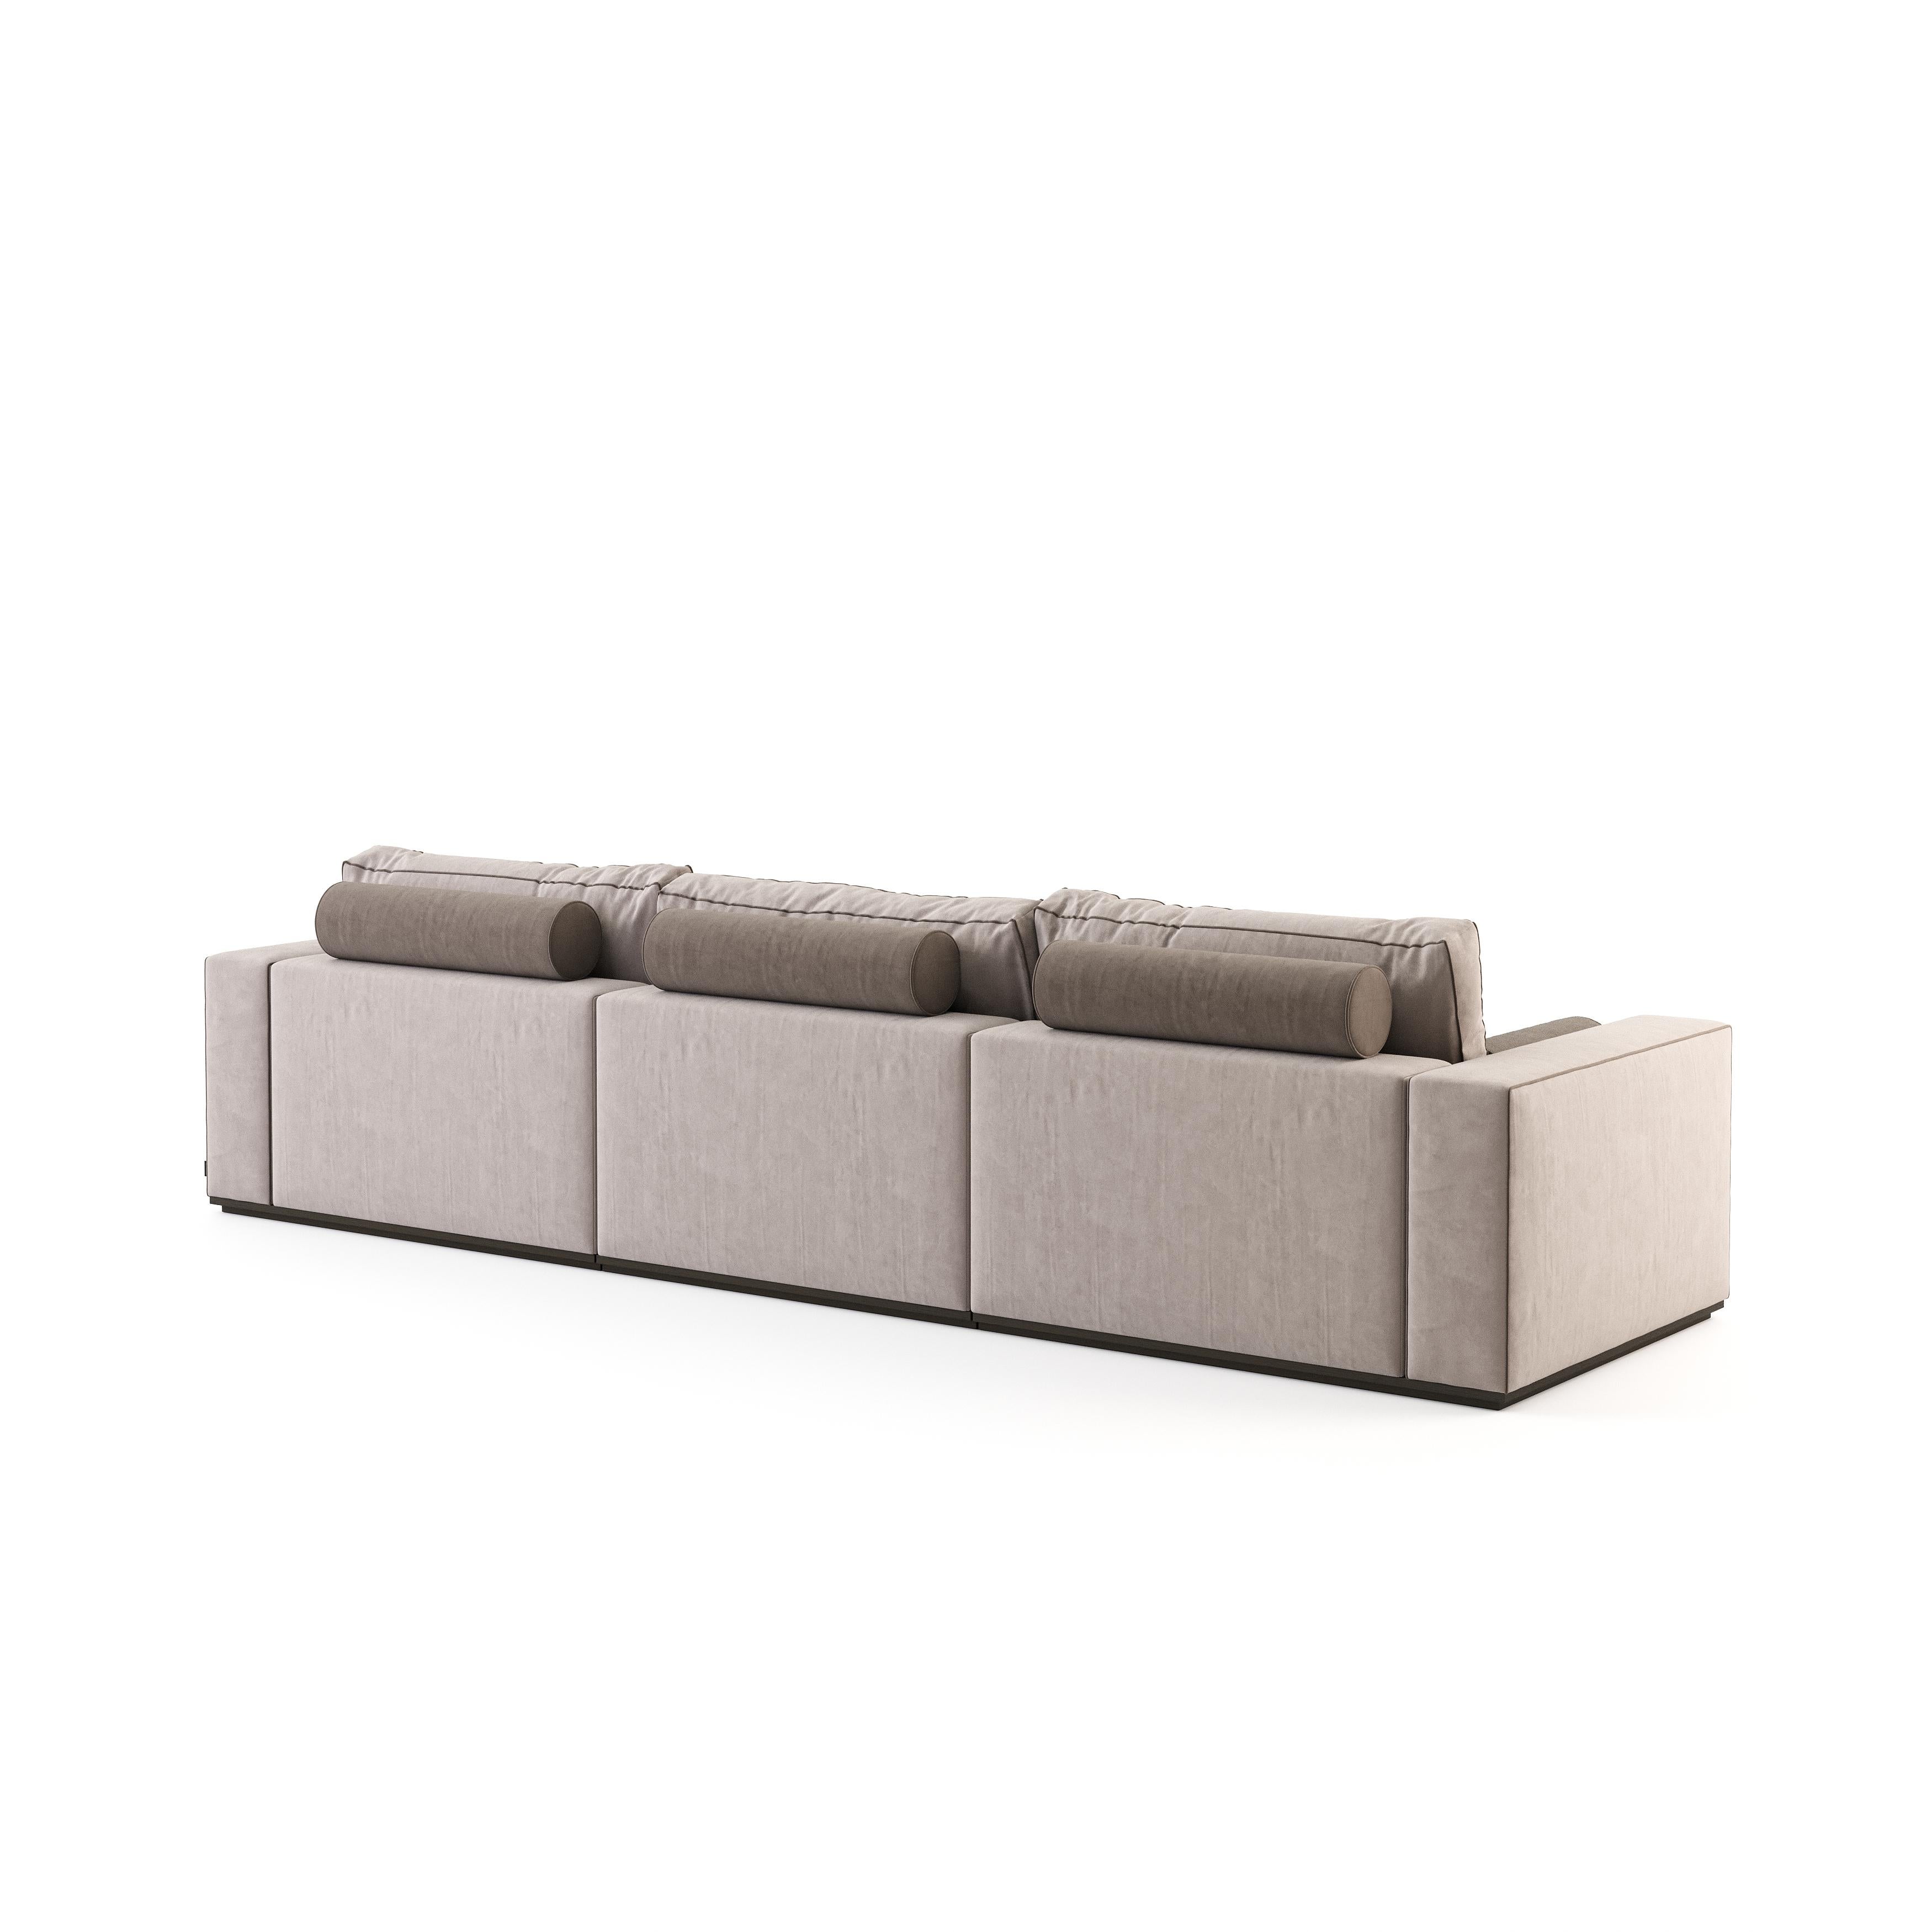 Portuguese Modern 3 Seats with Chaise Lounge Fortune Sofa Made with Wood and Textile For Sale